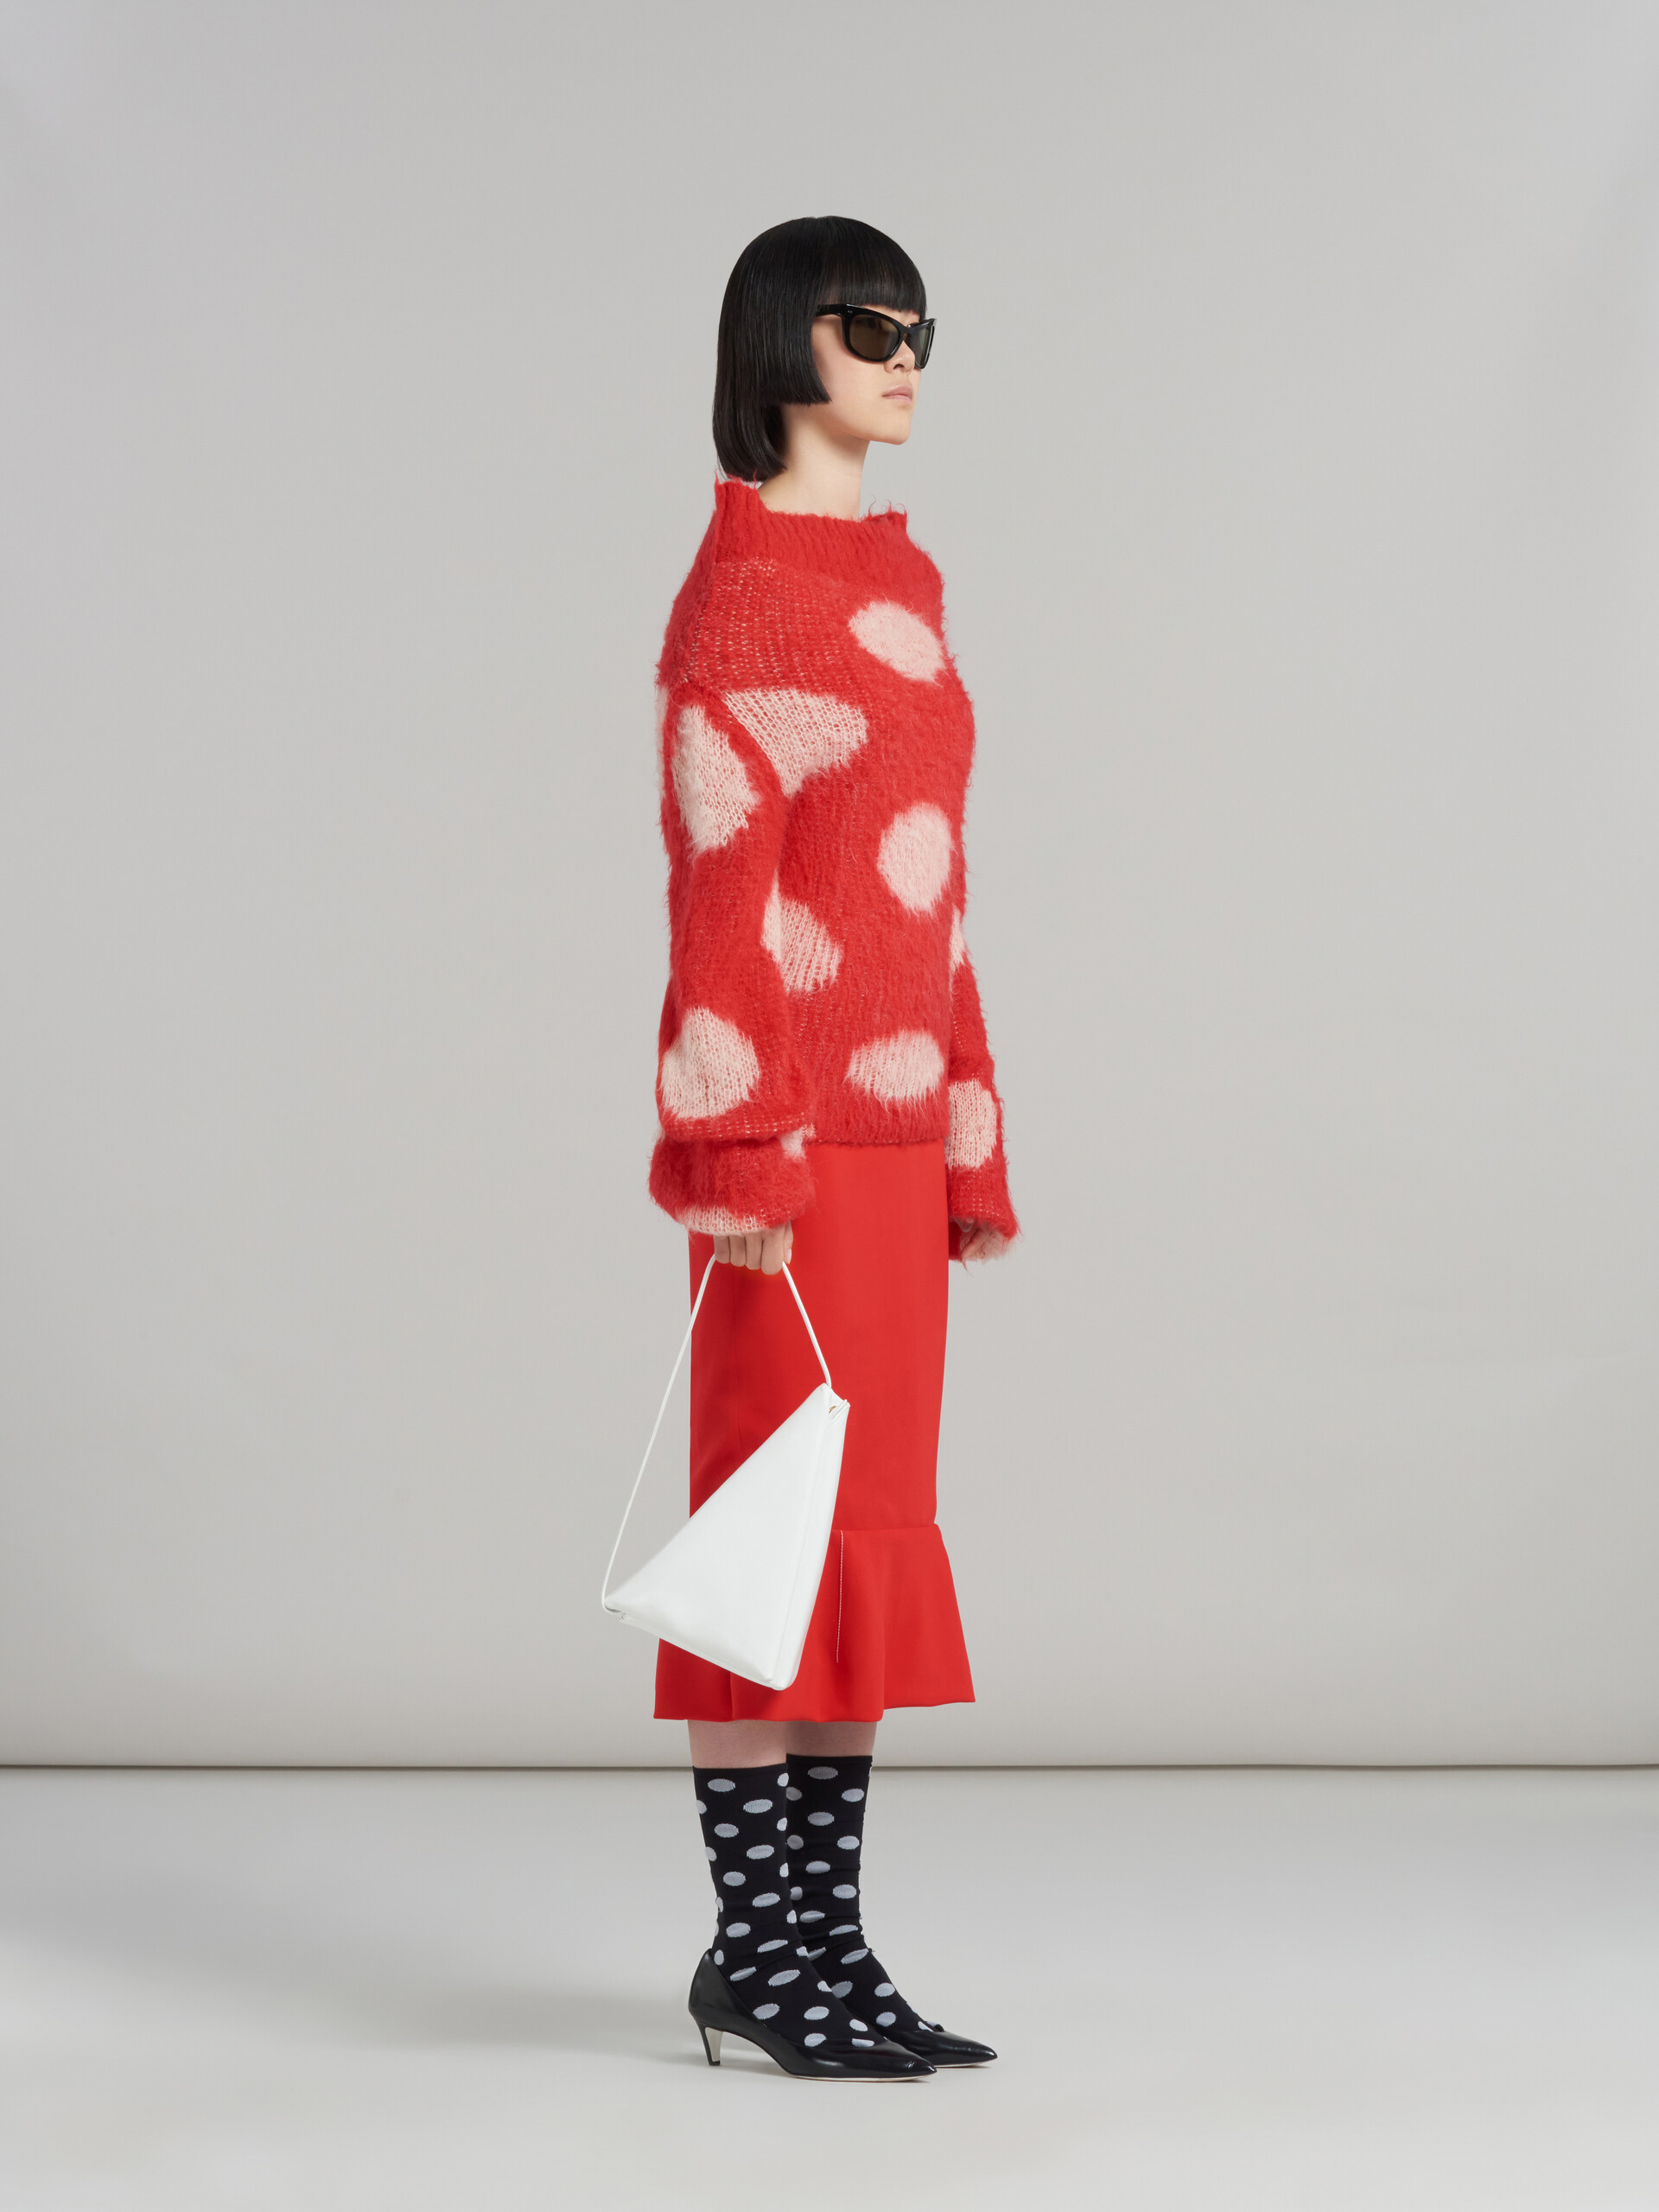 Red mohair boat-neck jumper with polka dots - Pullovers - Image 5